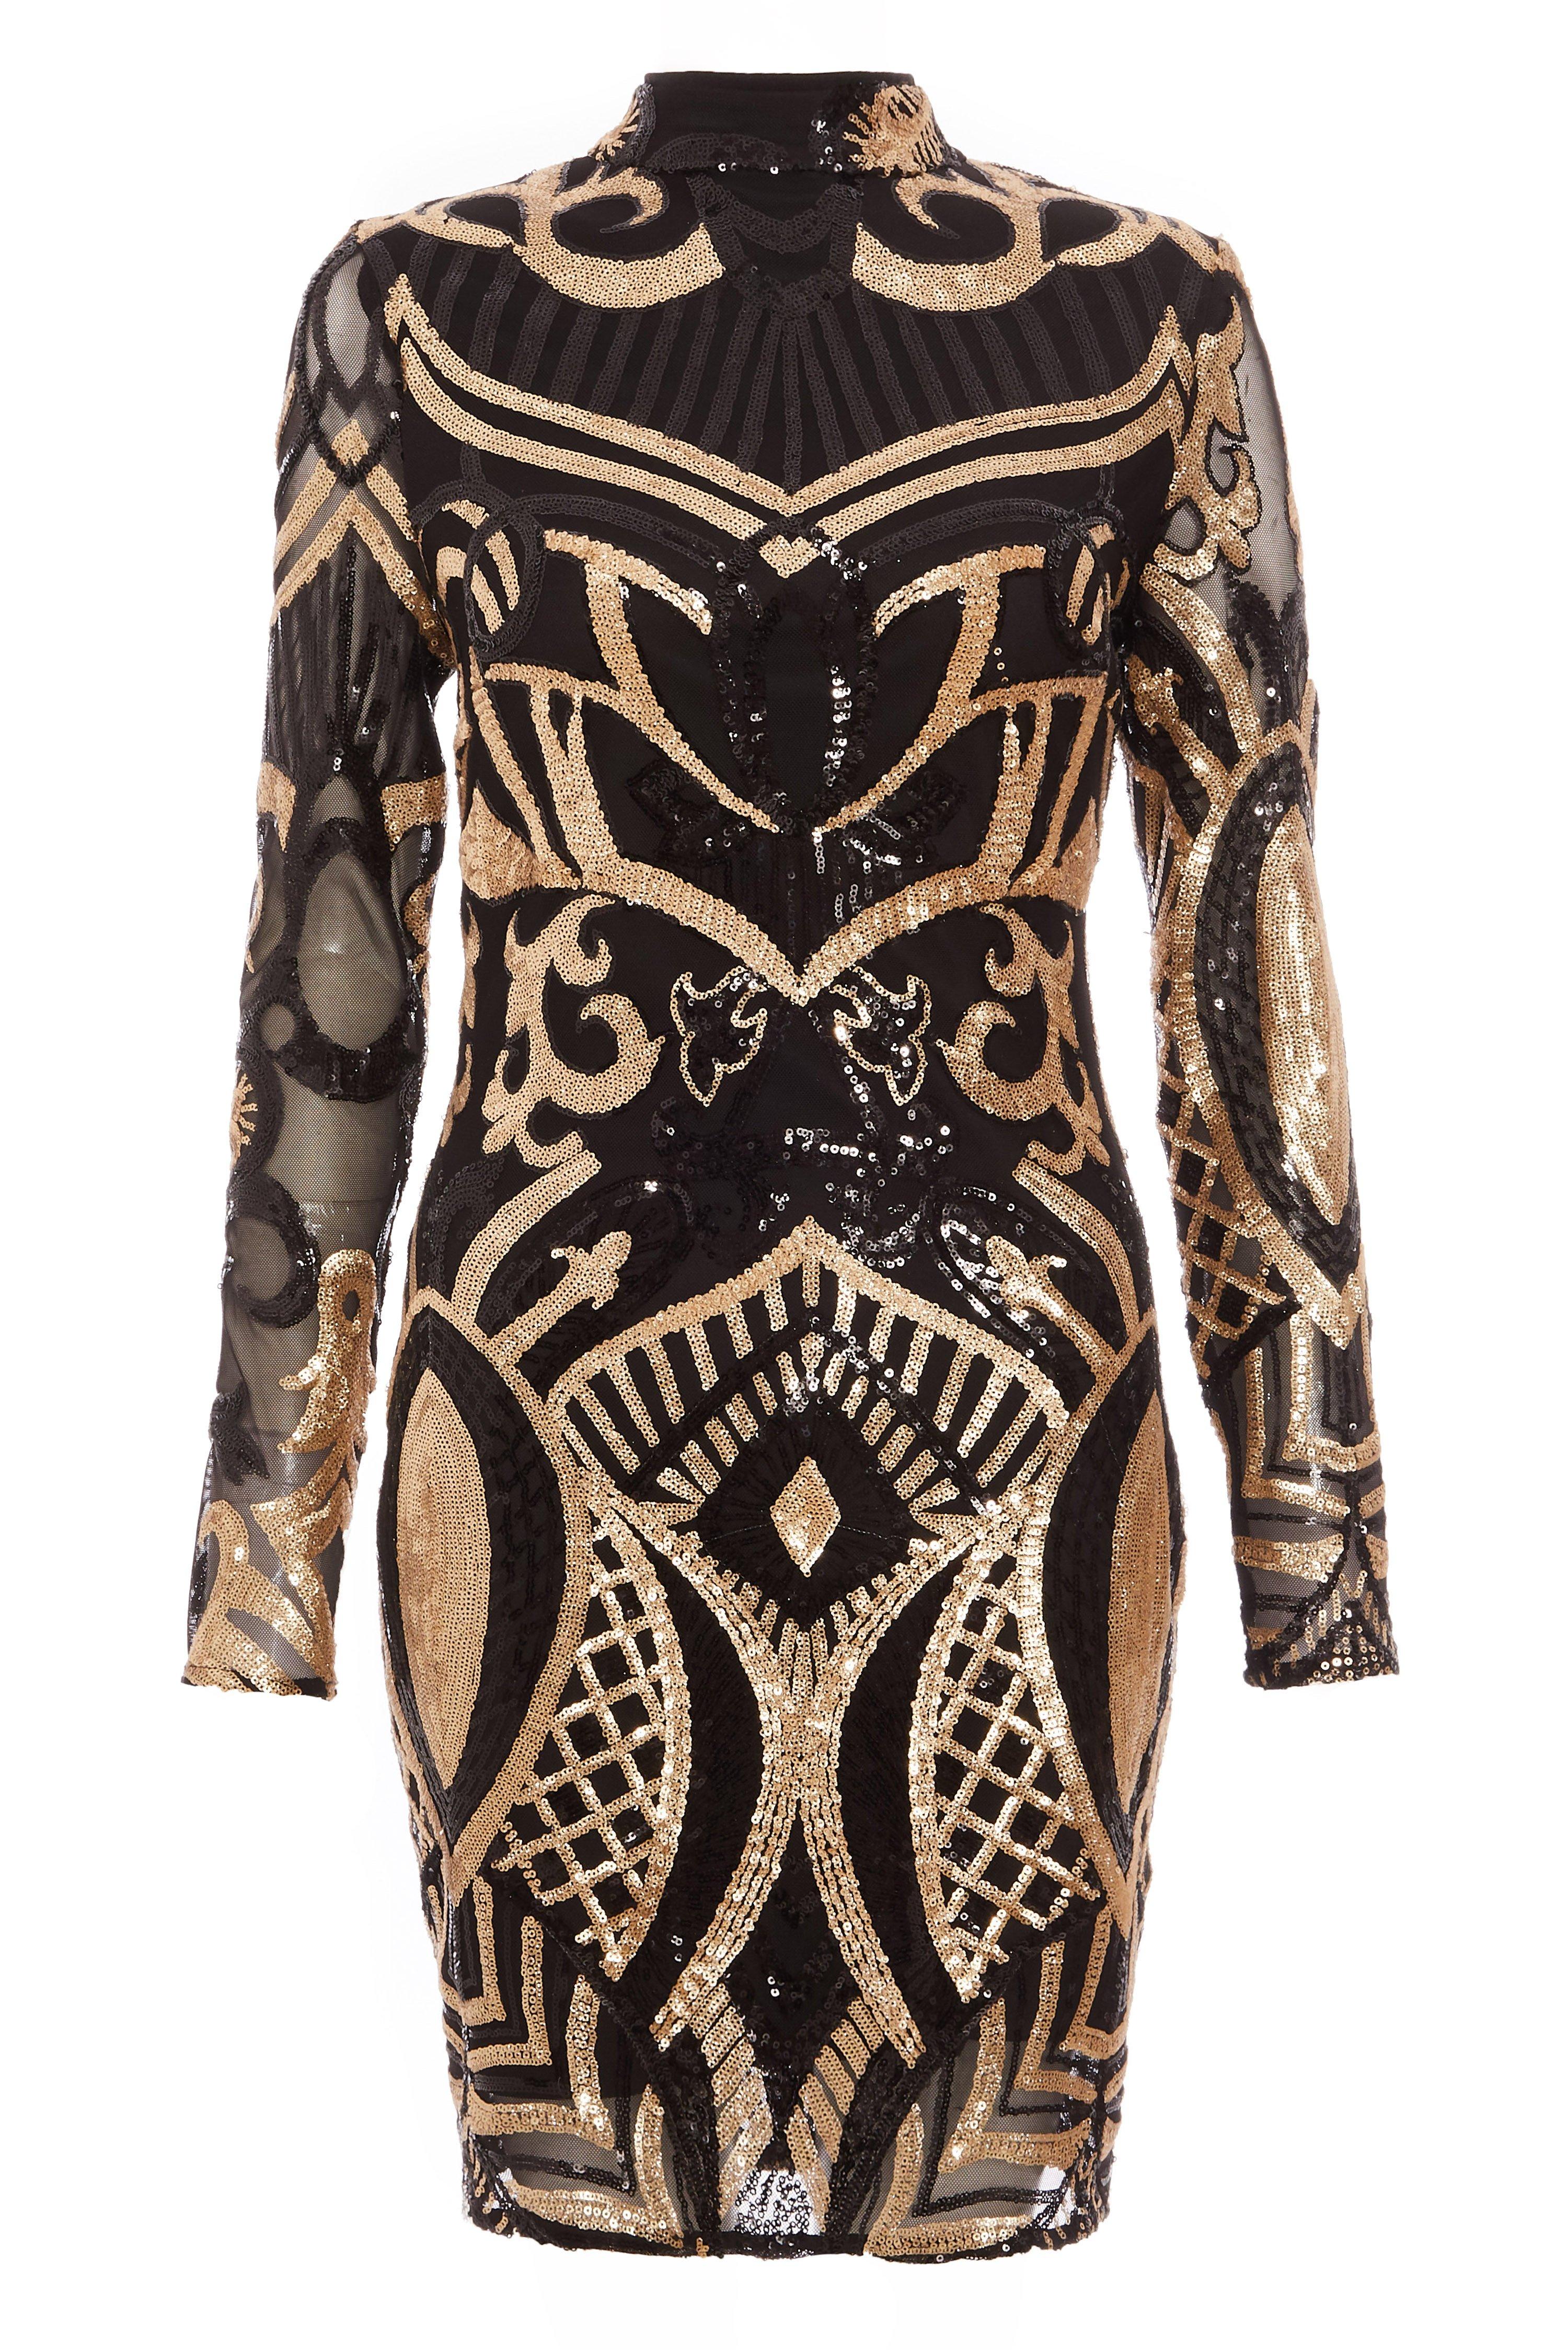 Black and Gold Sequin Turtle Neck Bodycon Dress - Quiz Clothing